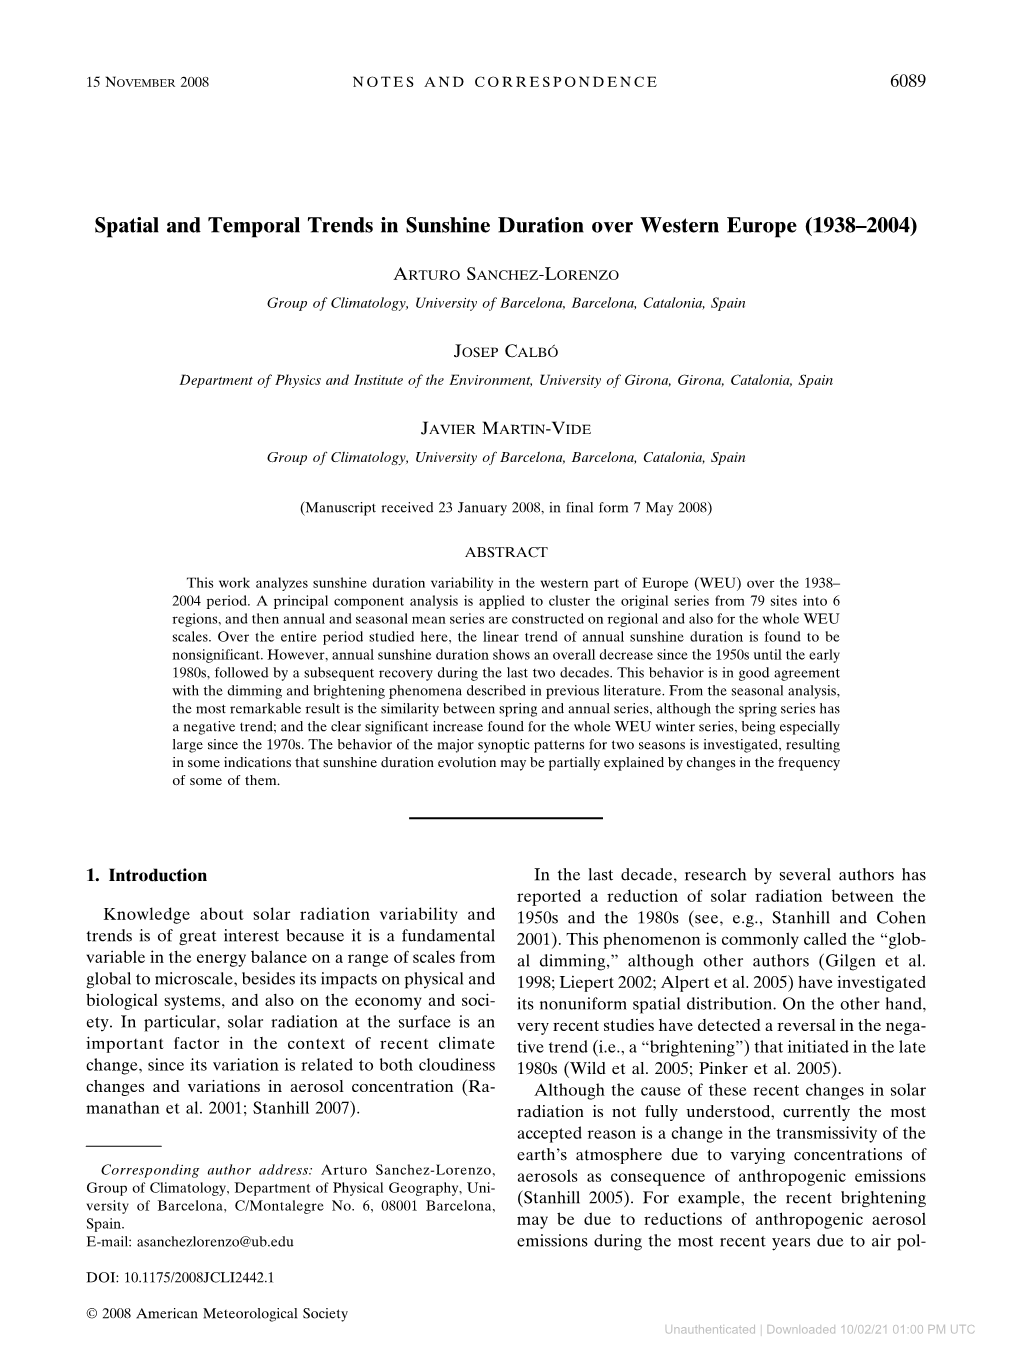 Spatial and Temporal Trends in Sunshine Duration Over Western Europe (1938–2004)